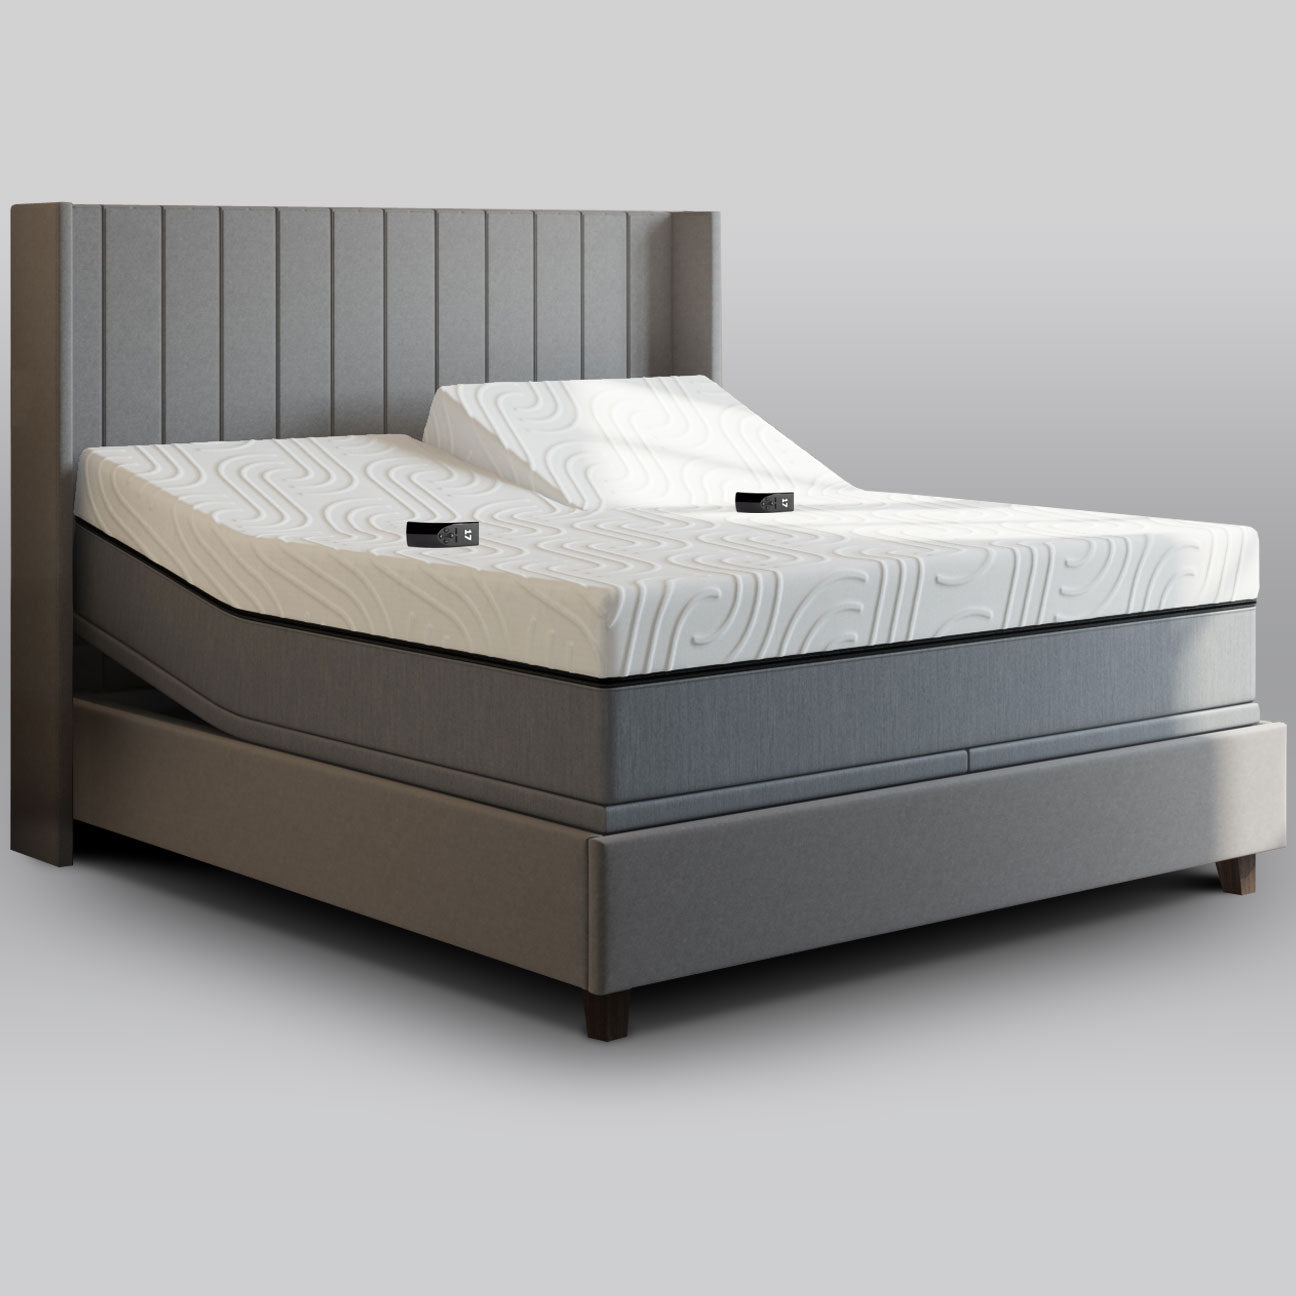 Personal Comfort R15 Bed